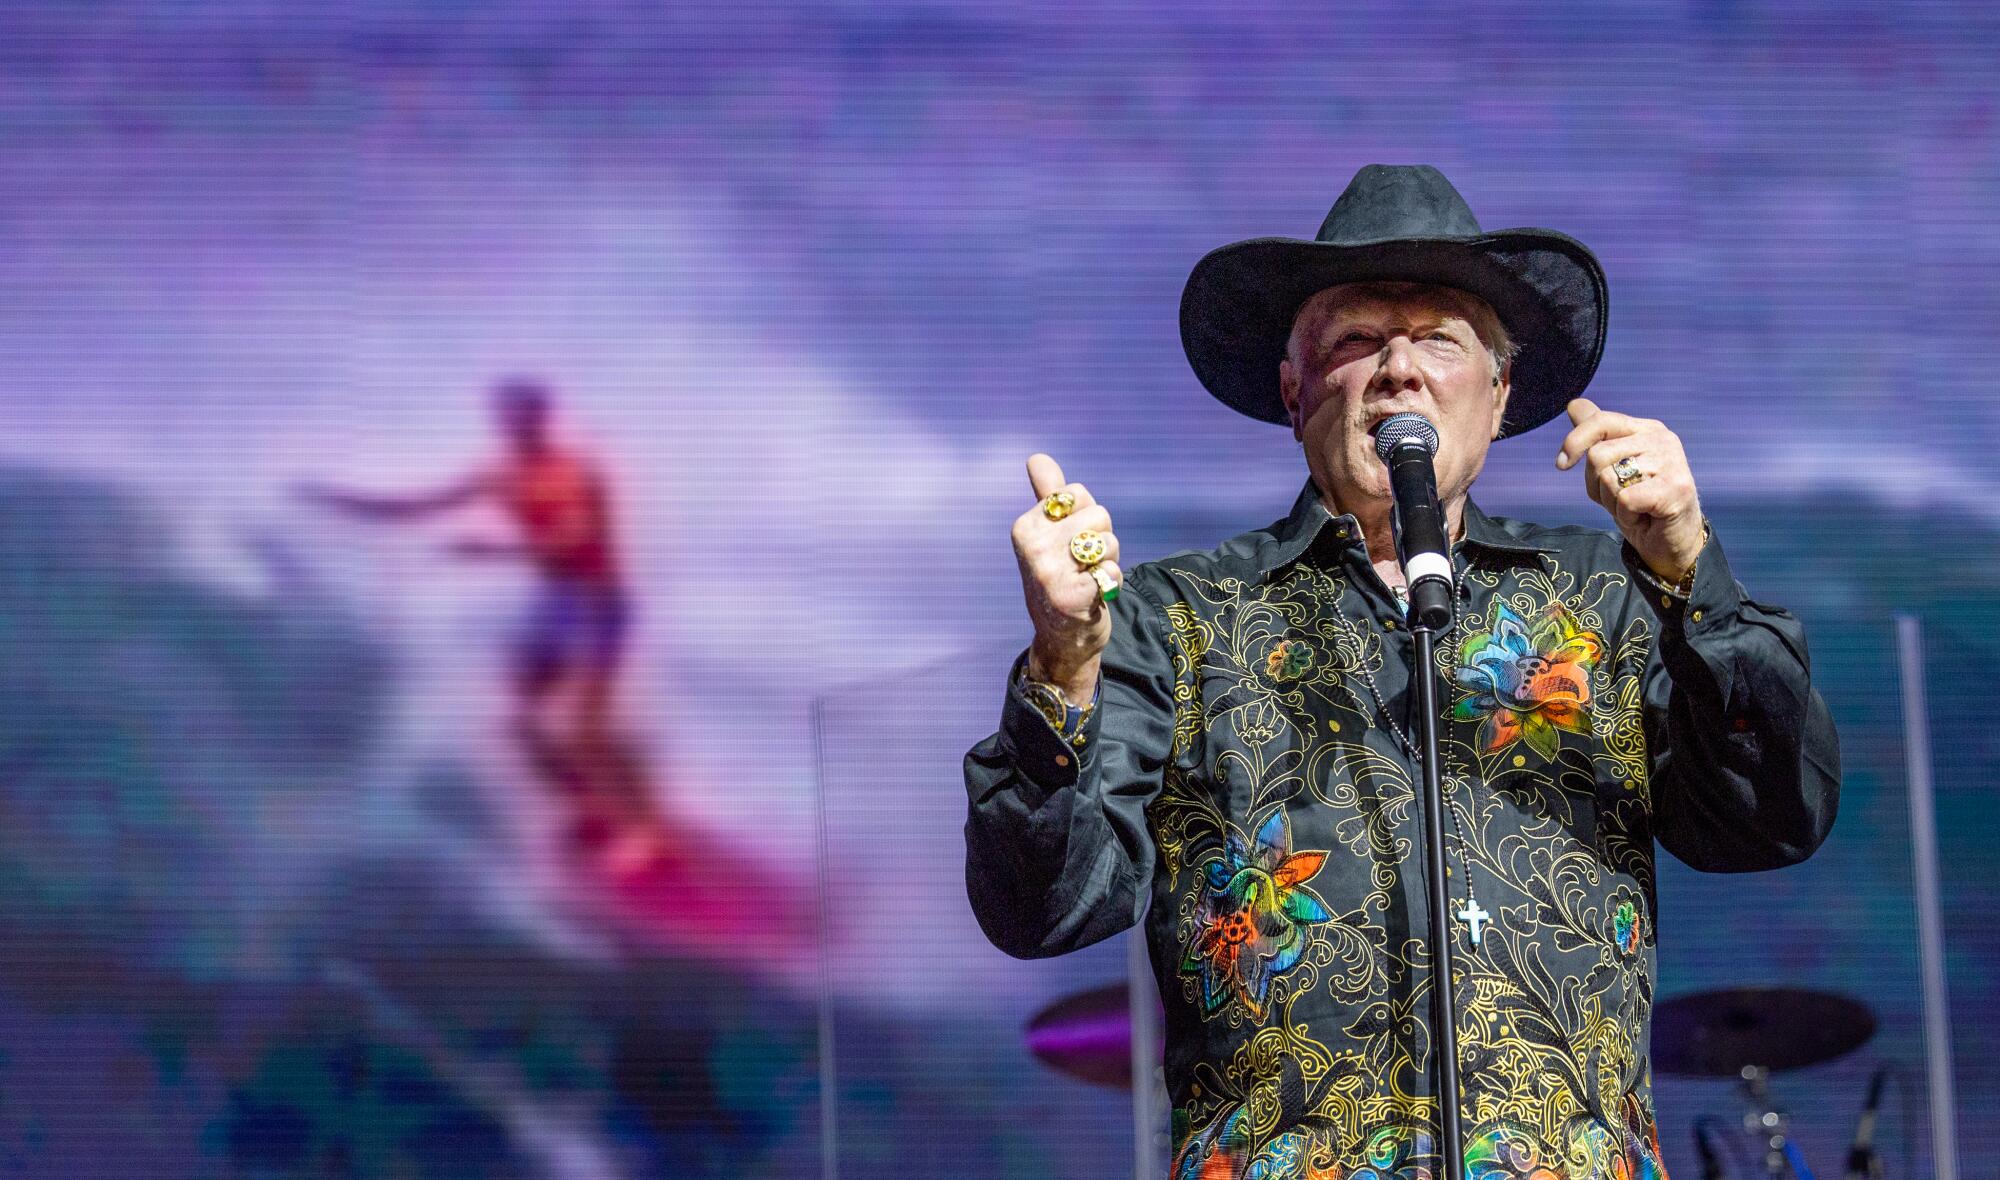 Mike Love of the Beach Boys performs on the Palomino stage on the final day of Stagecoach.